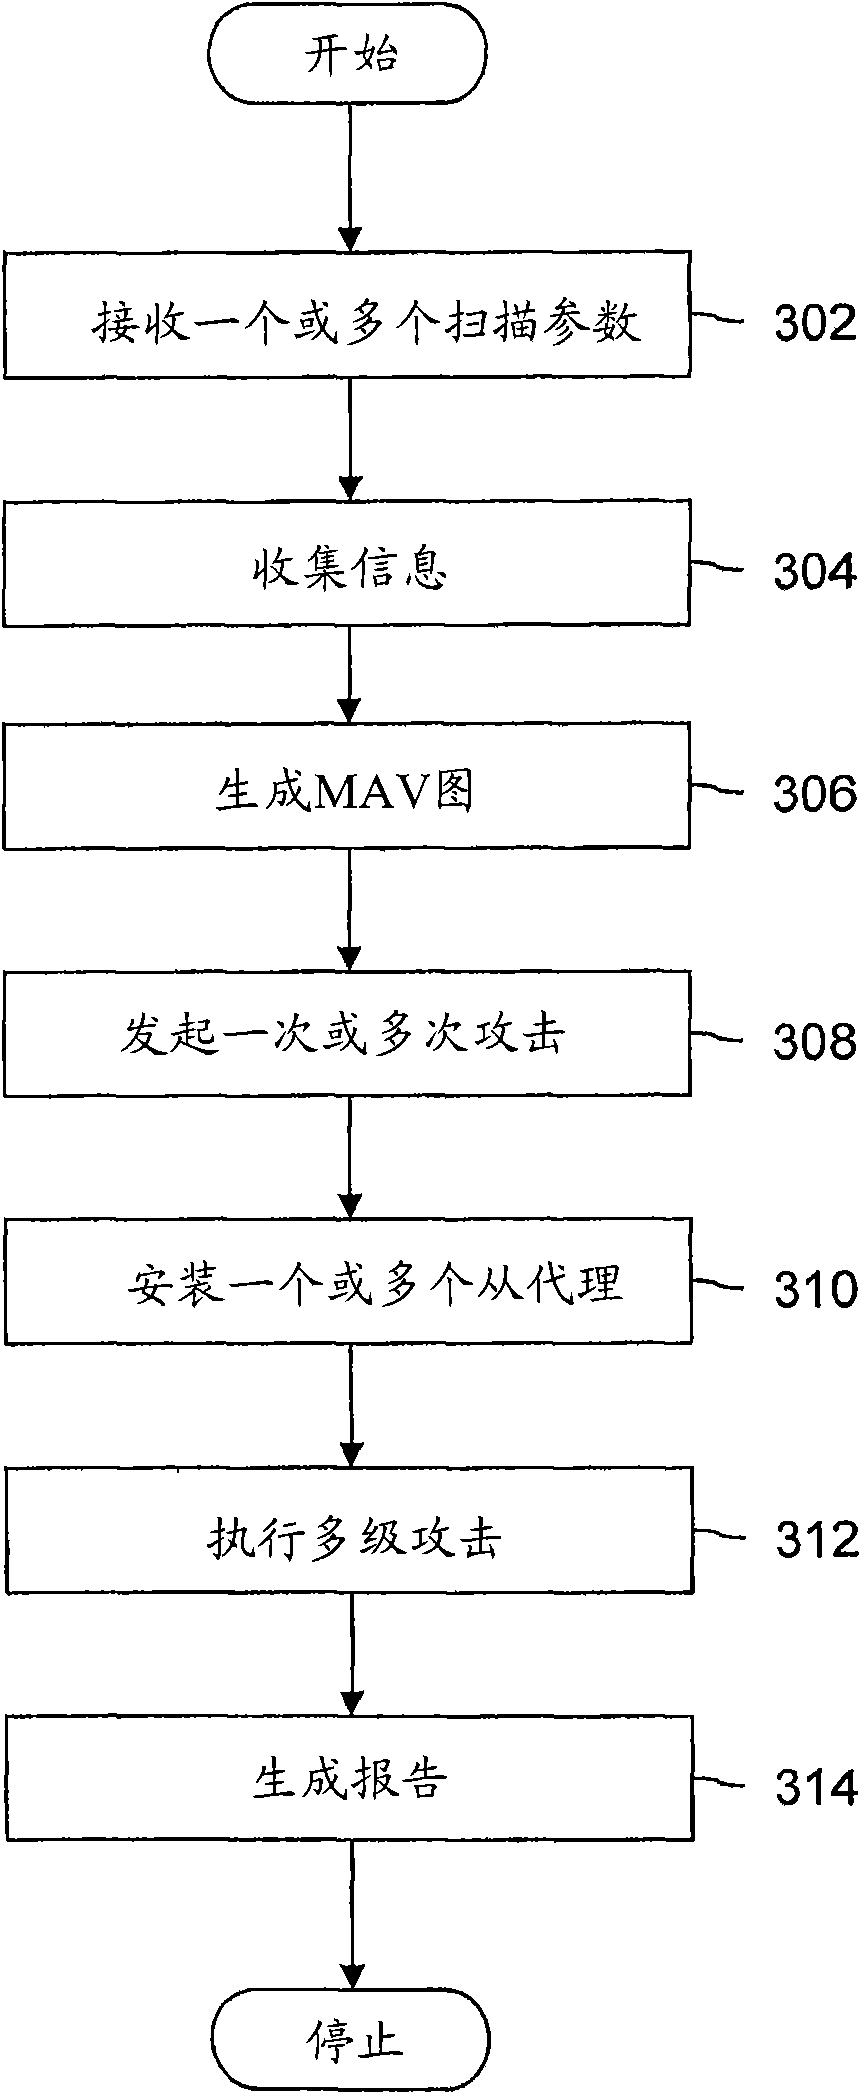 Method and system for simulating a hacking attack on a network